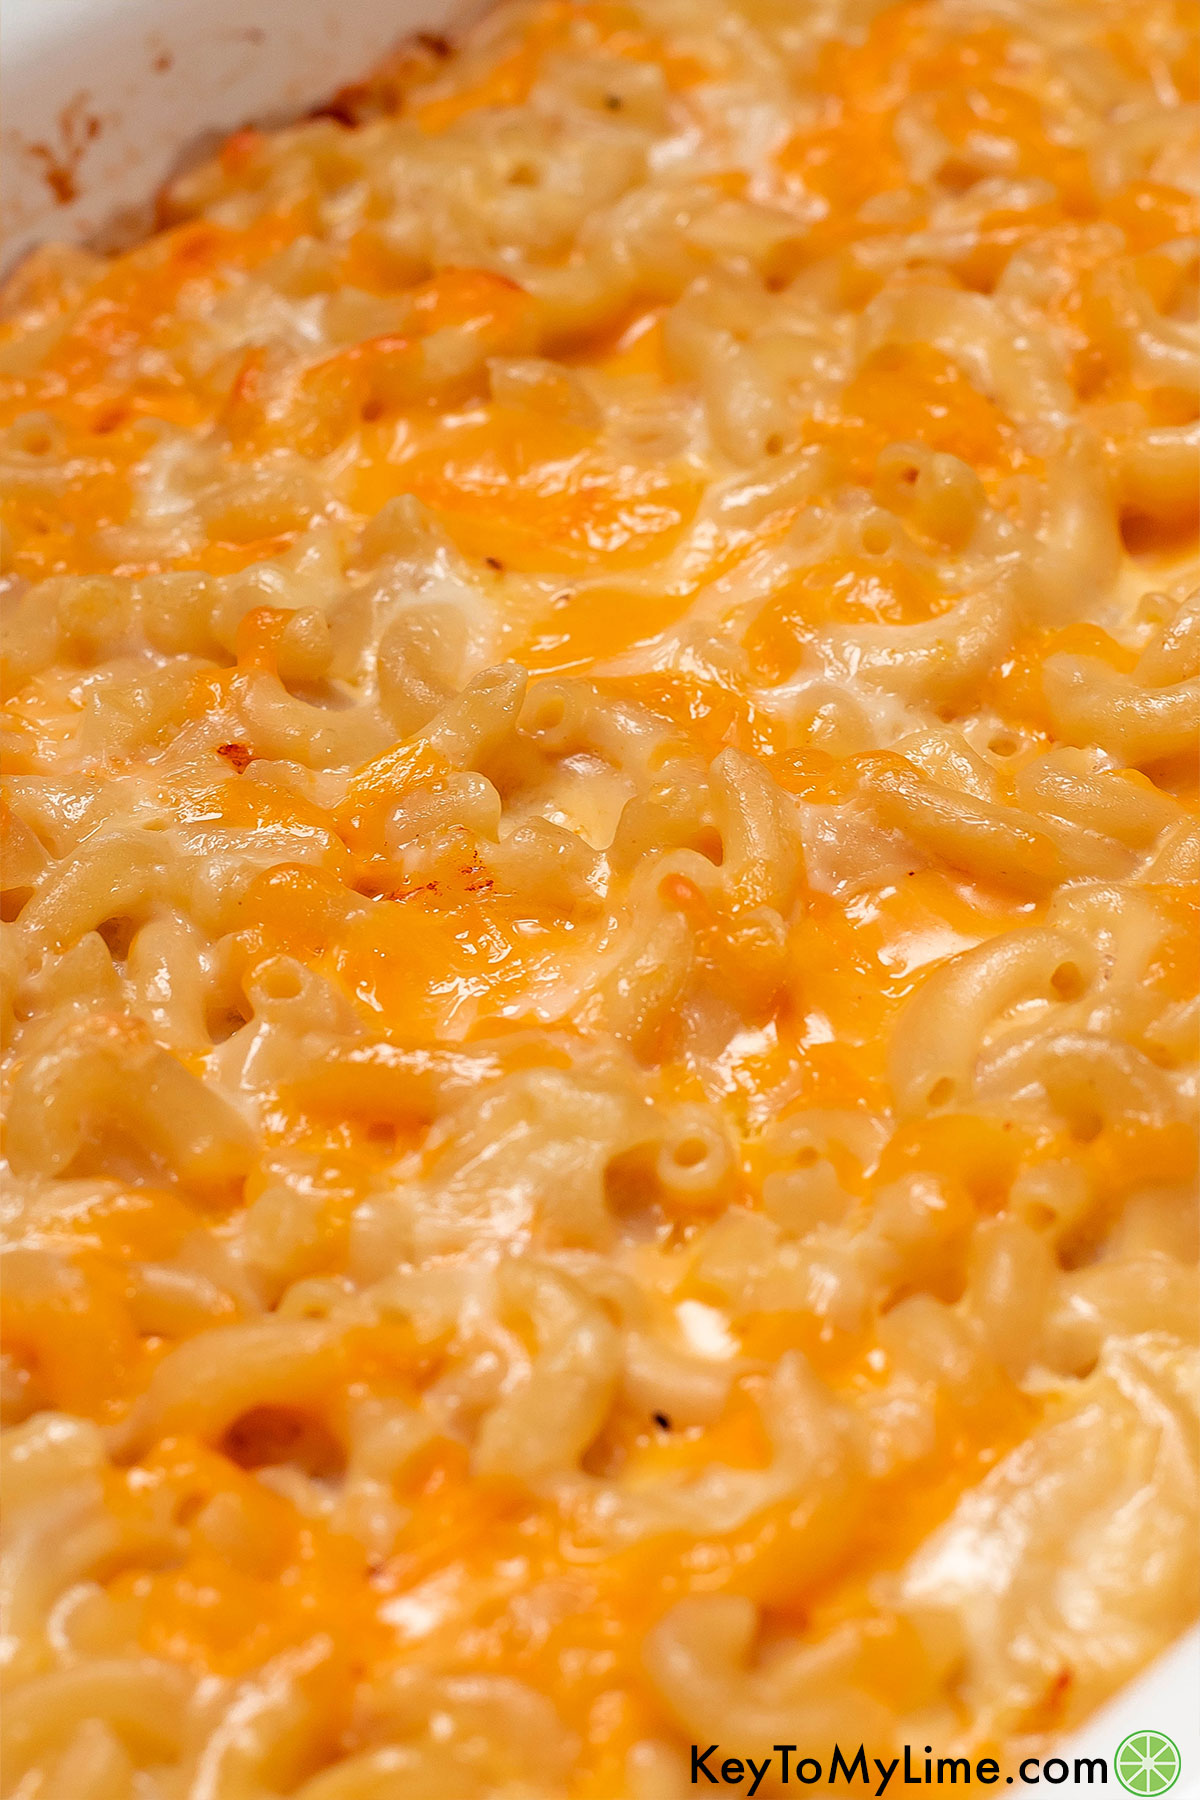 A close up of the cheesy layer on the mac and cheese dish.